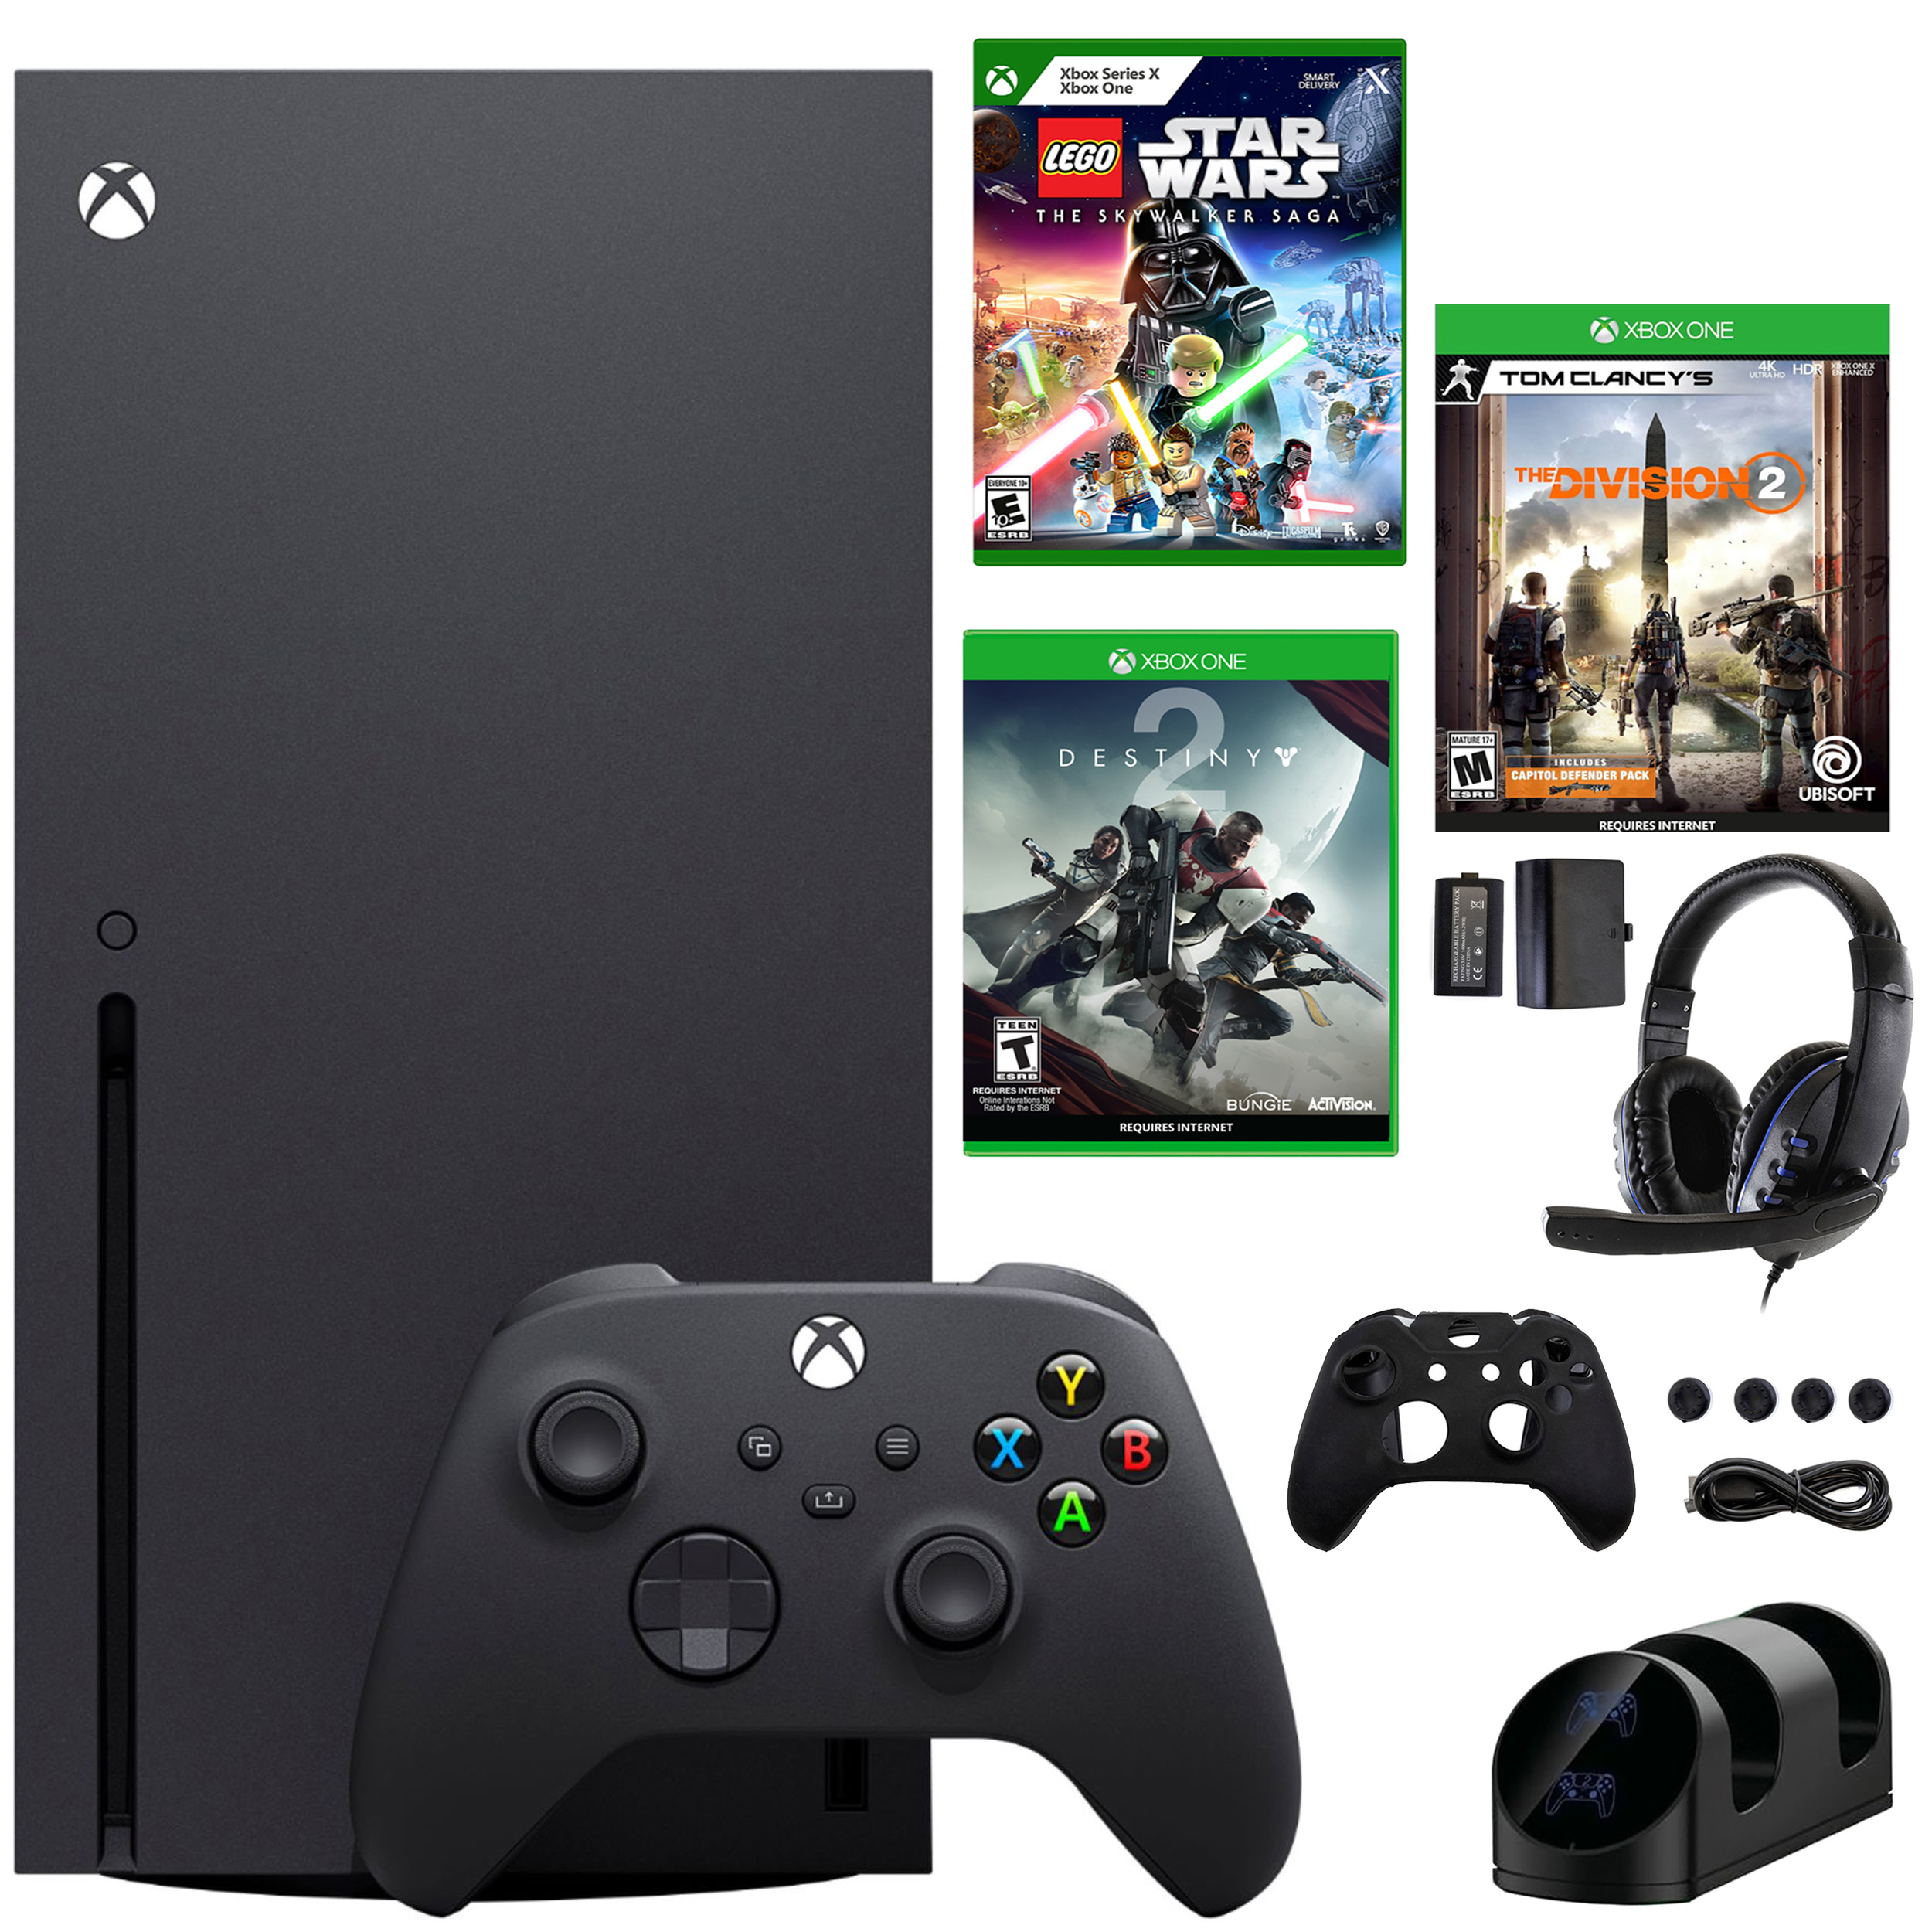 Microsoft Xbox Series X 1TB Console with Skywalker and Accessories Kit